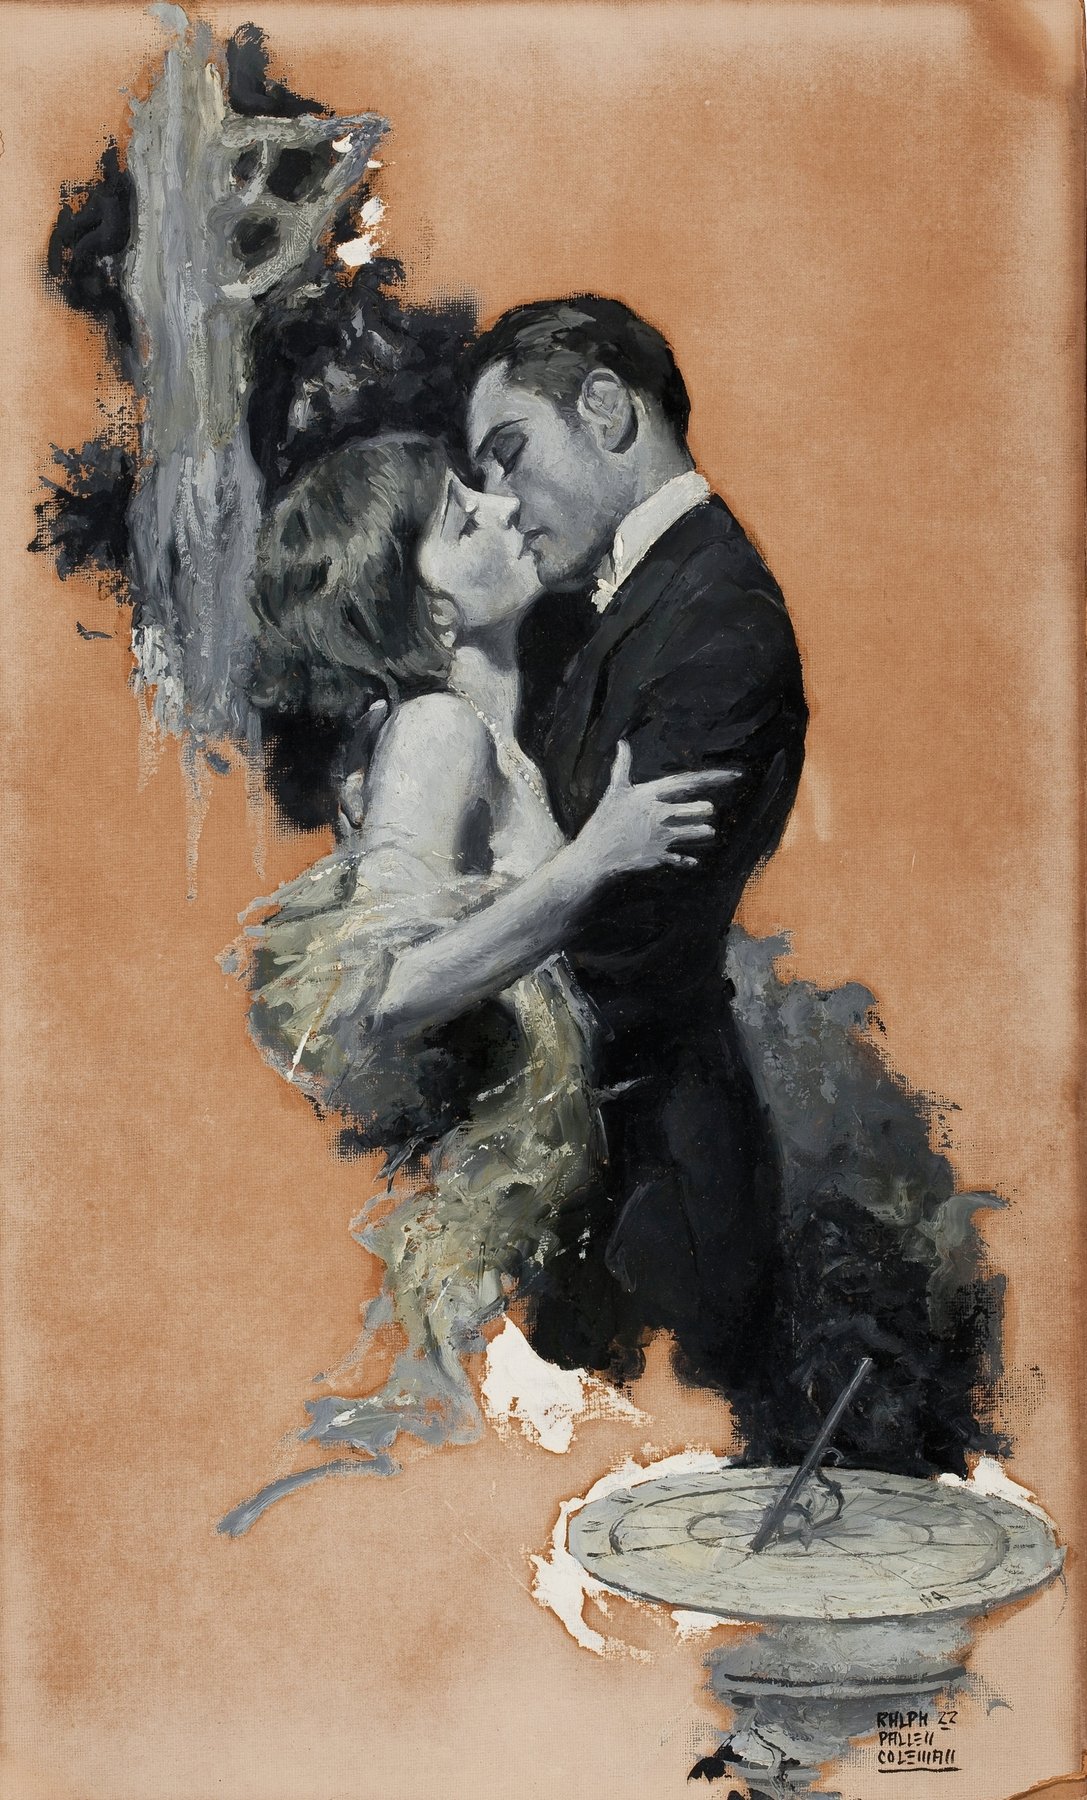 A Passionate Kiss (1922)